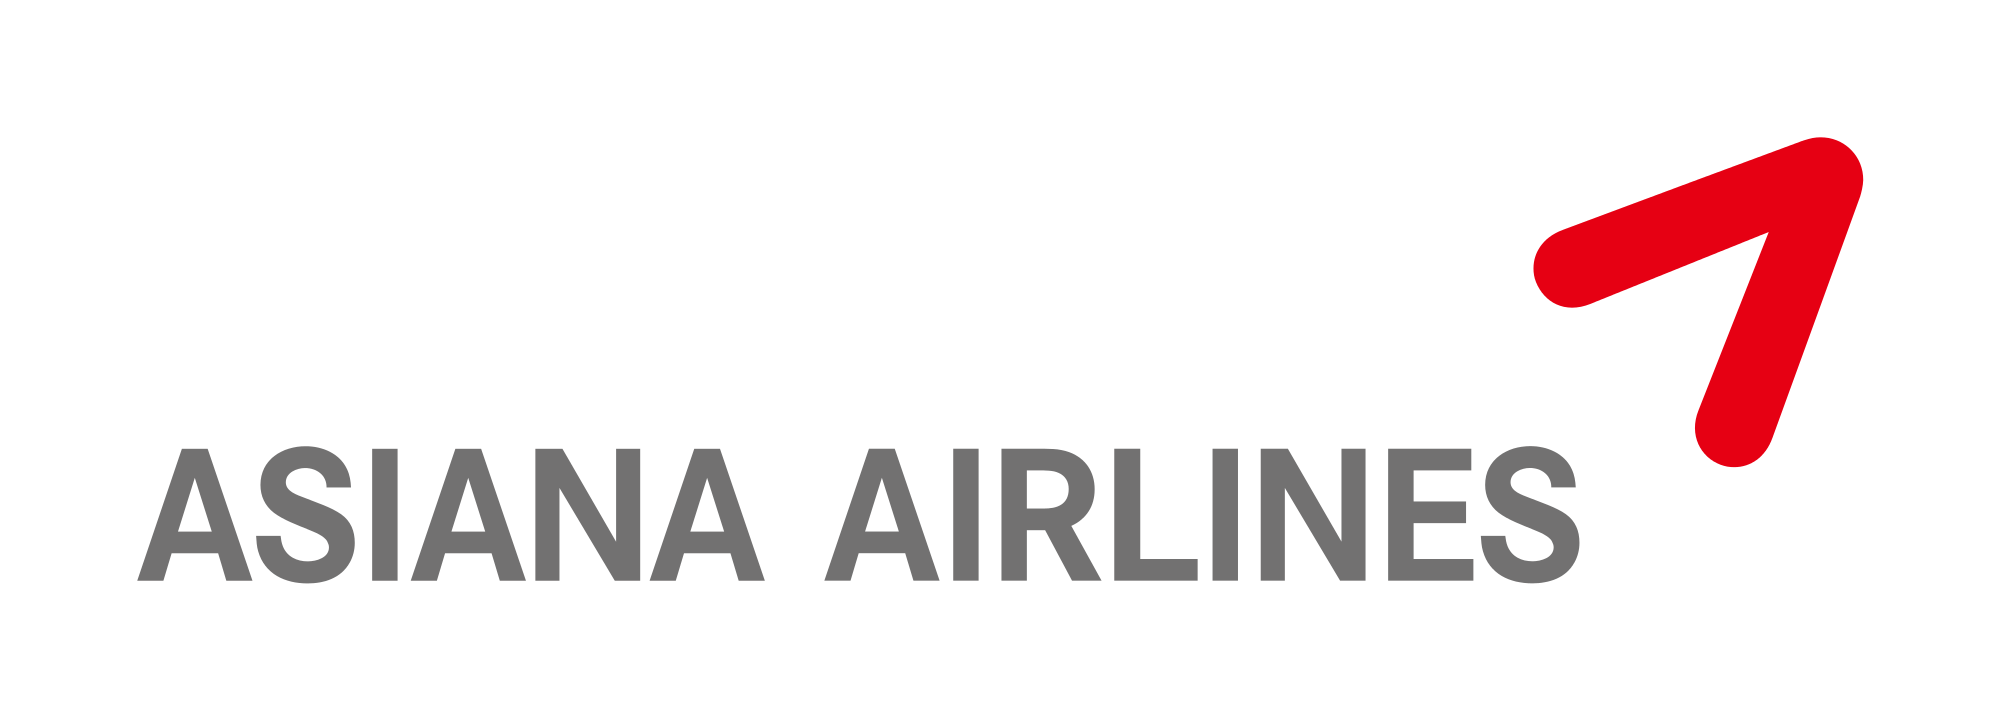 Asiana Airlines PNG - 97286